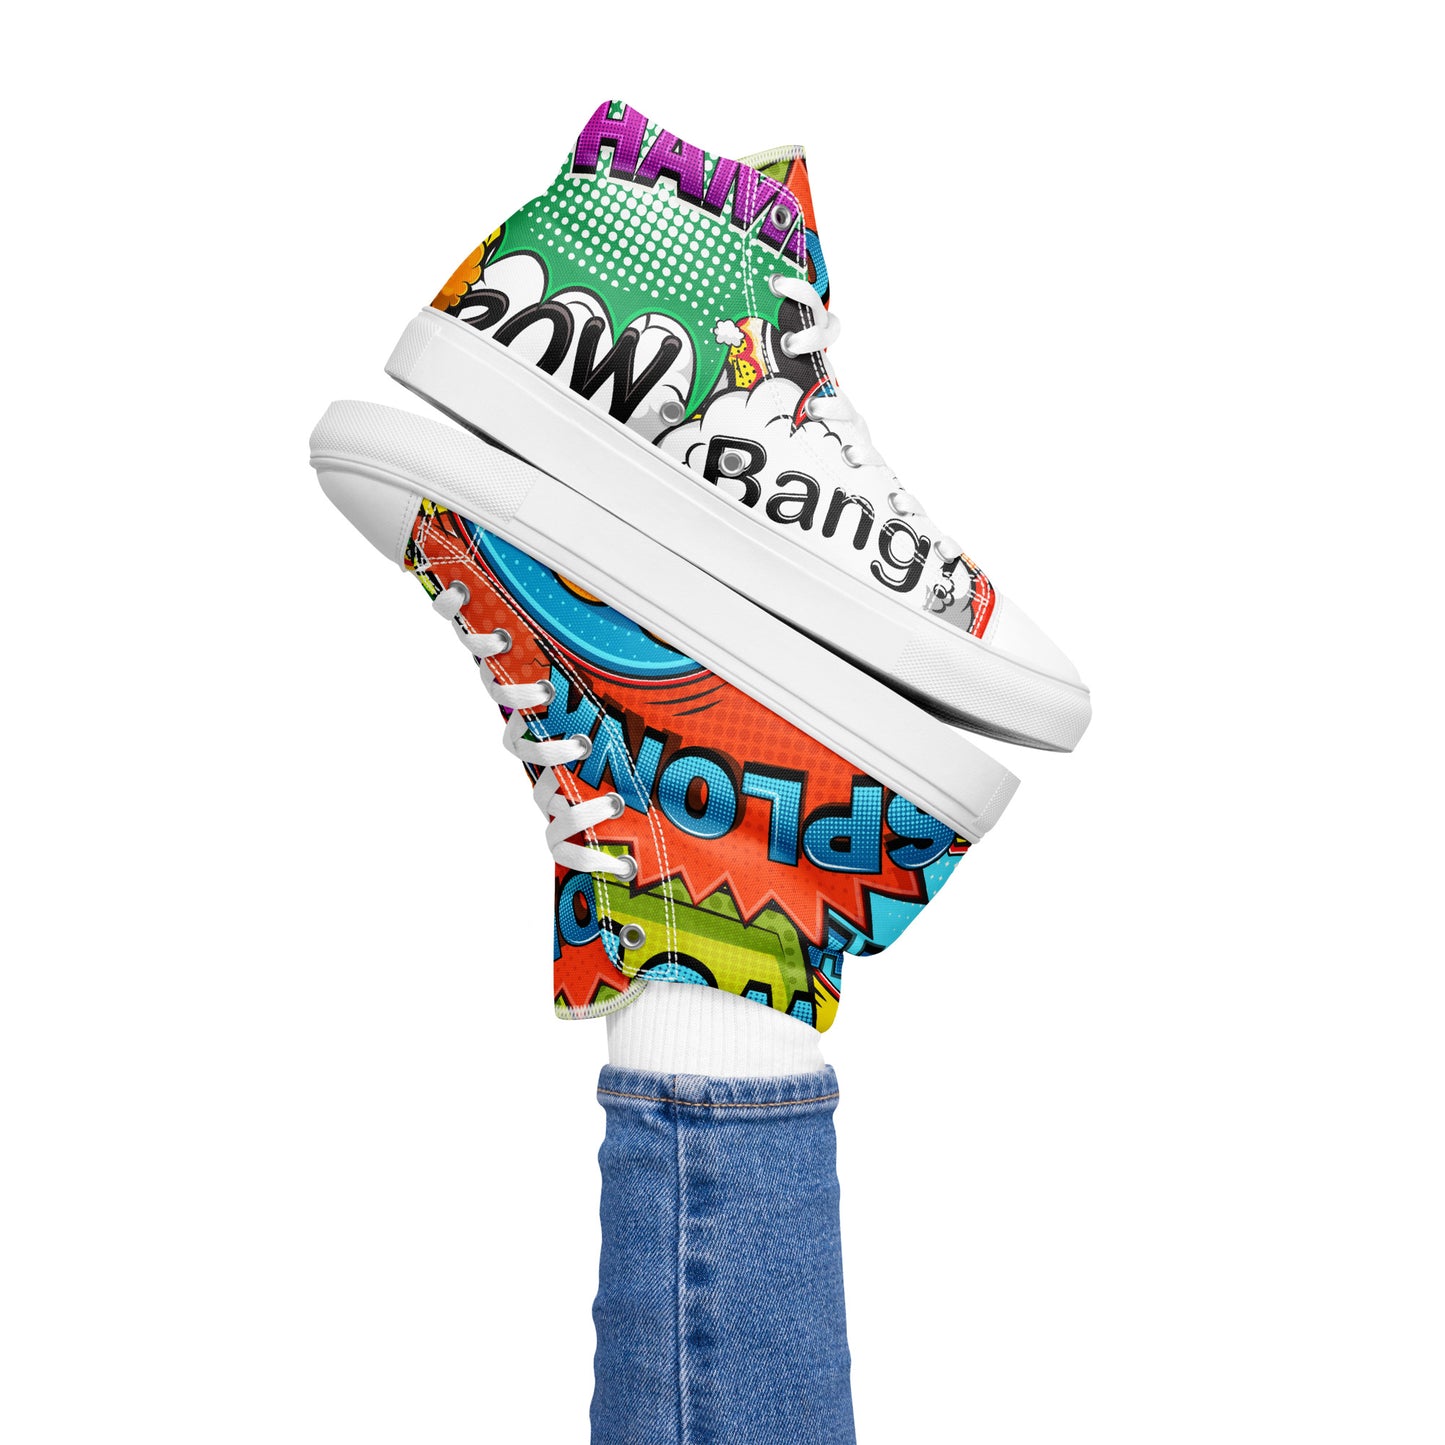 Comic Book - Women’s high top canvas shoes Womens High Top Shoes